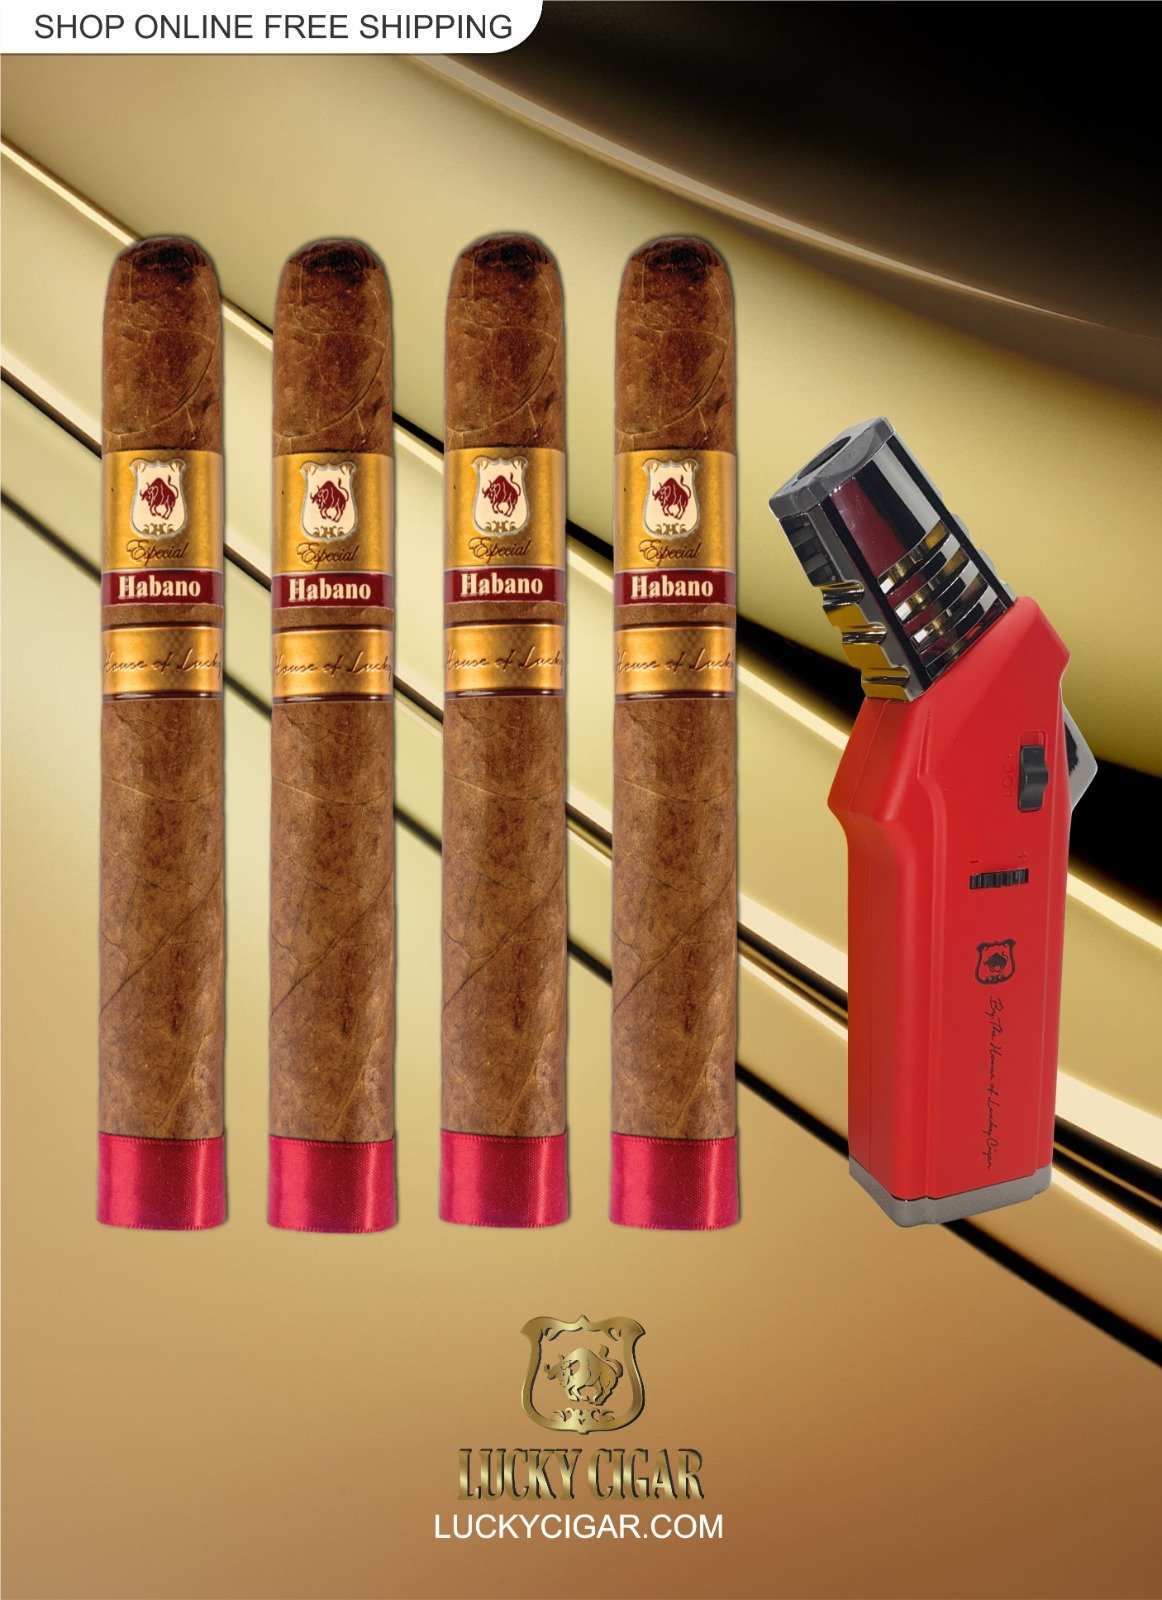 Habano Cigars: Especial Habano by Lucky Cigar: Set of 4 Cigars, 4 Toro with Lighter Red